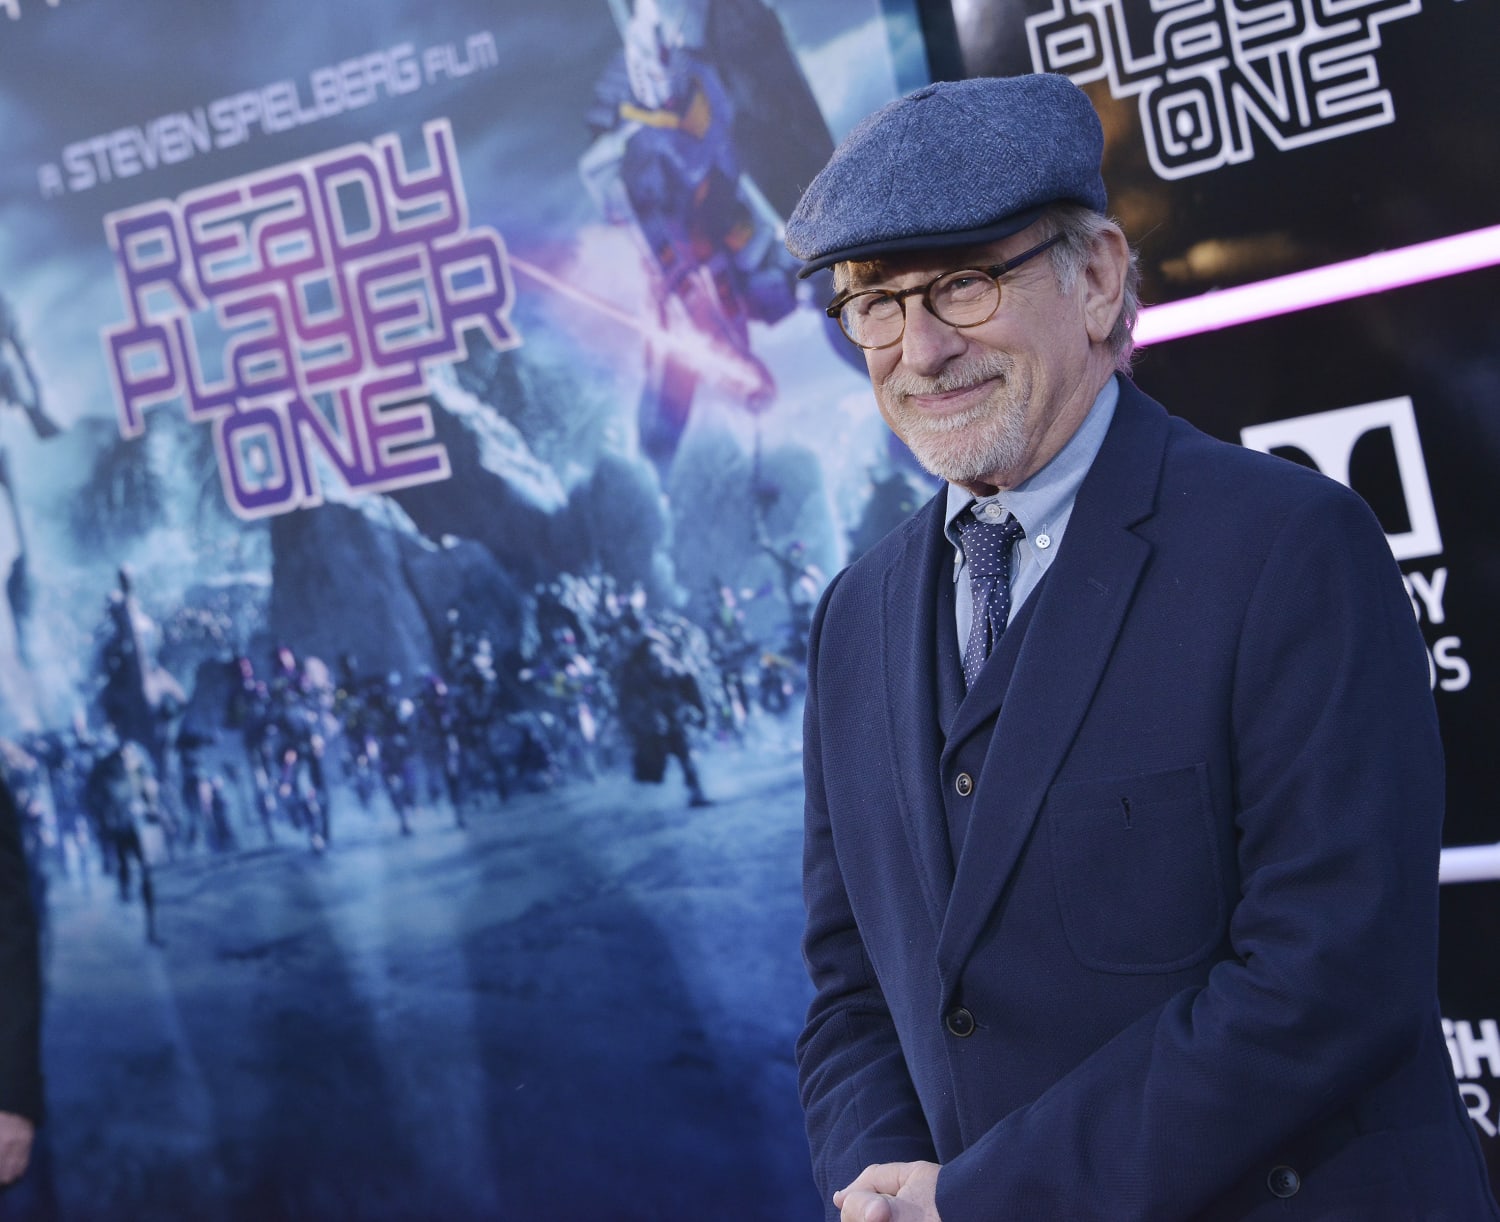 New Trailer: 'Ready Player One,' From Steven Spielberg - The New York Times